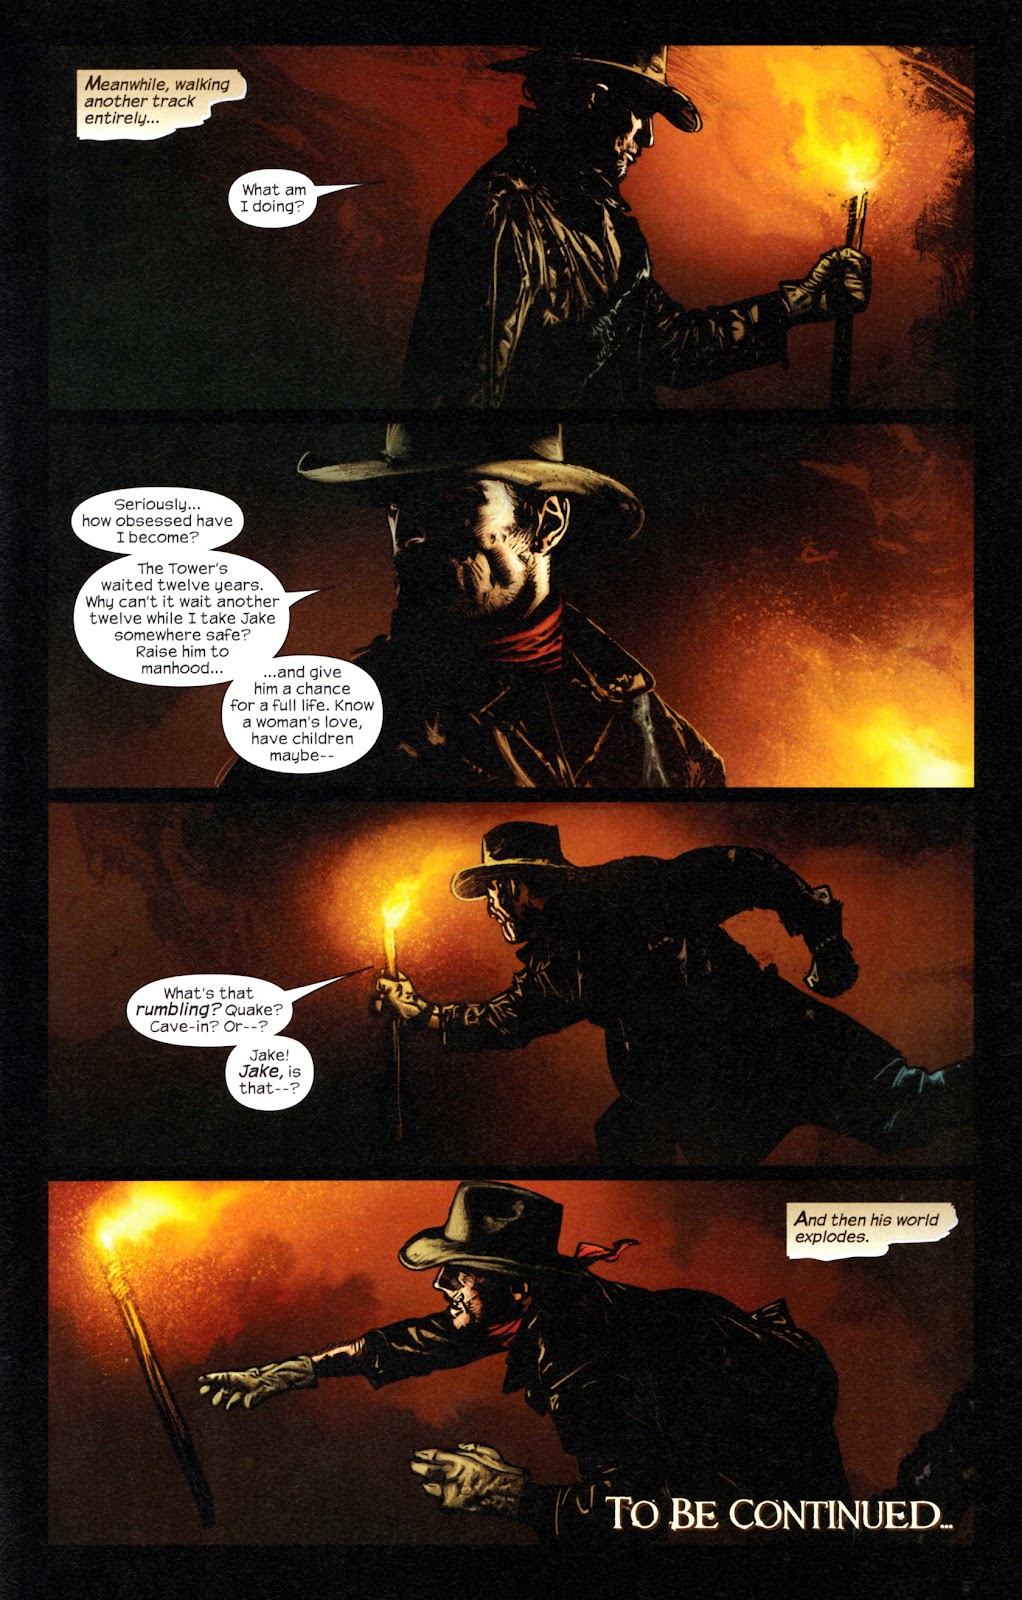 Dark Tower: The Gunslinger - The Man in Black issue 1 - Page 25